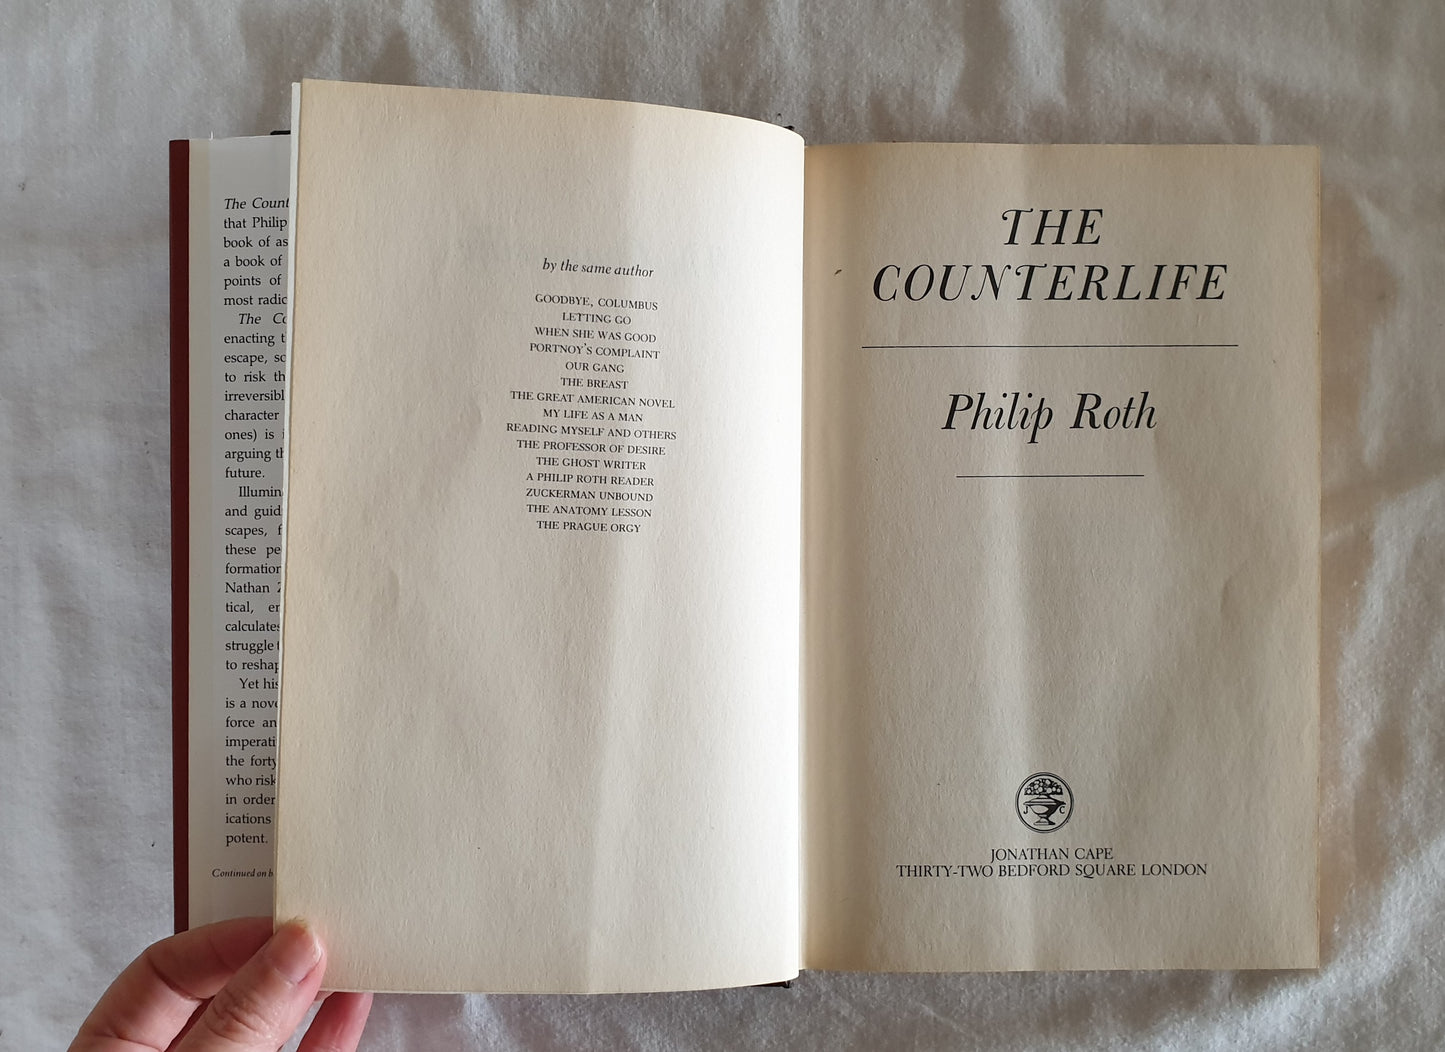 The Counterlife by Philip Roth